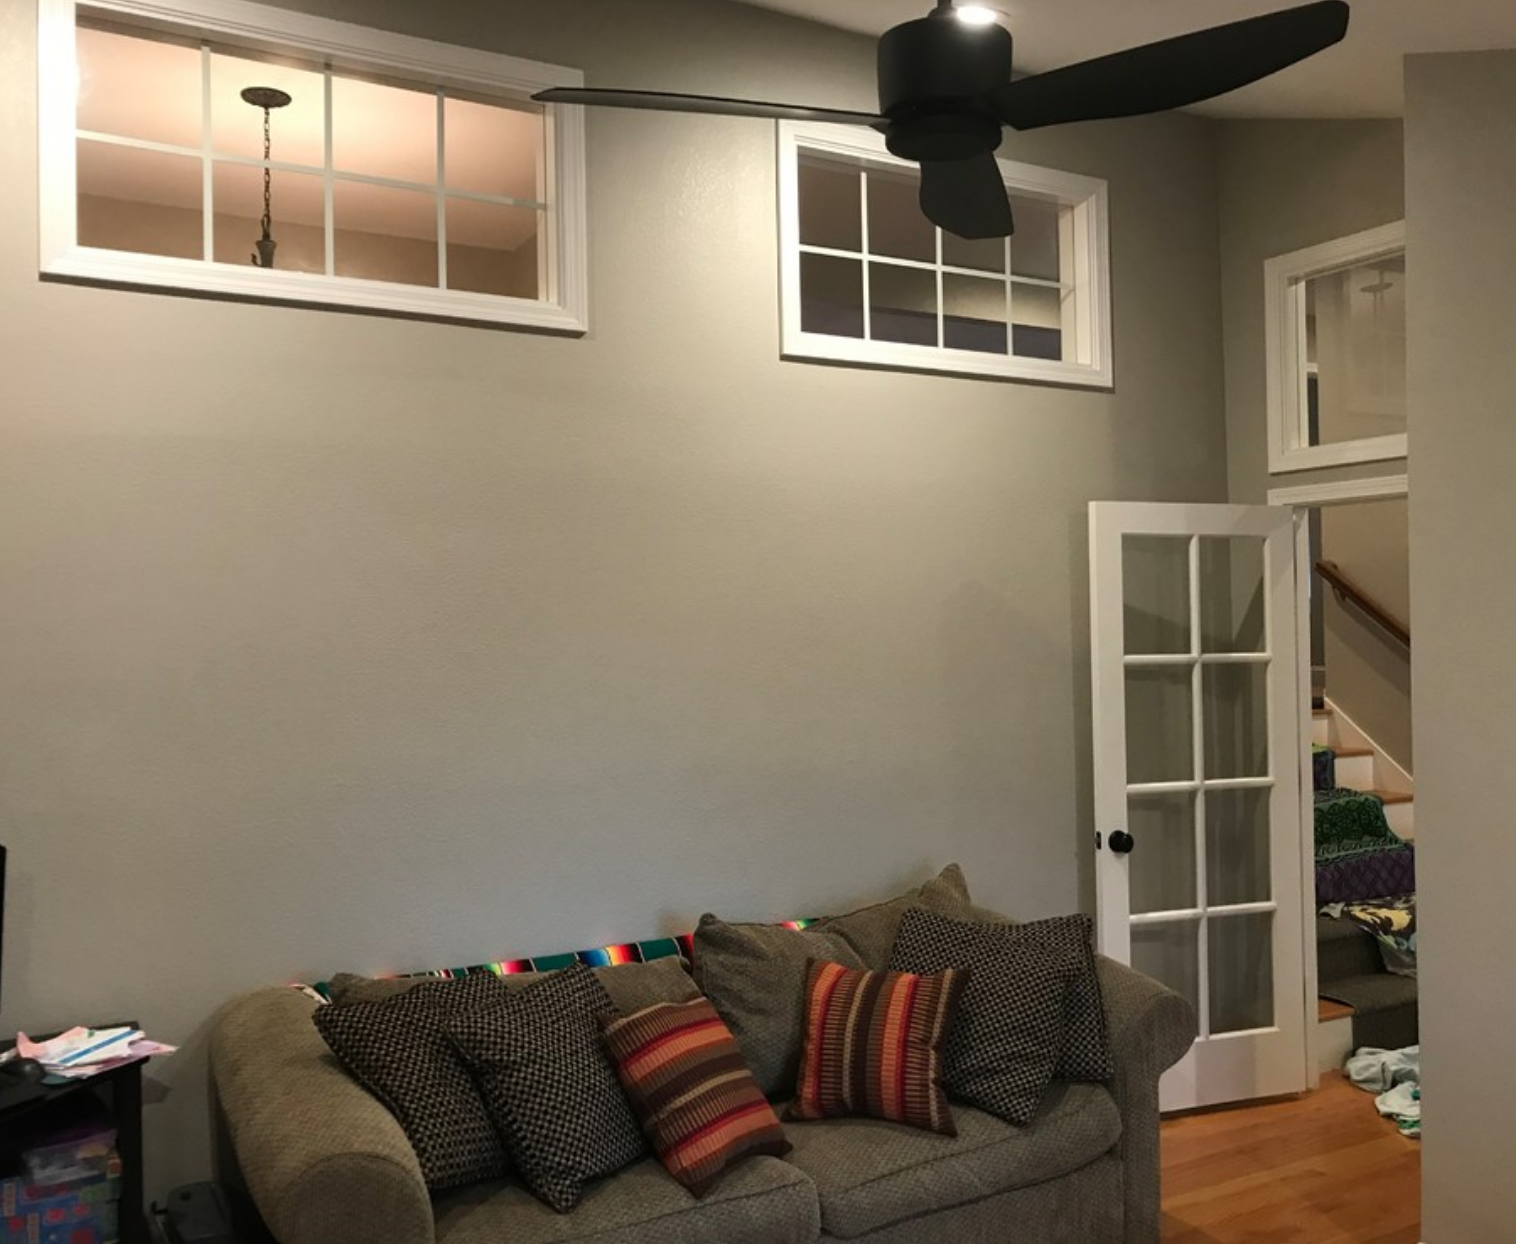 New Family Room/Playroom Created For Expanding Family